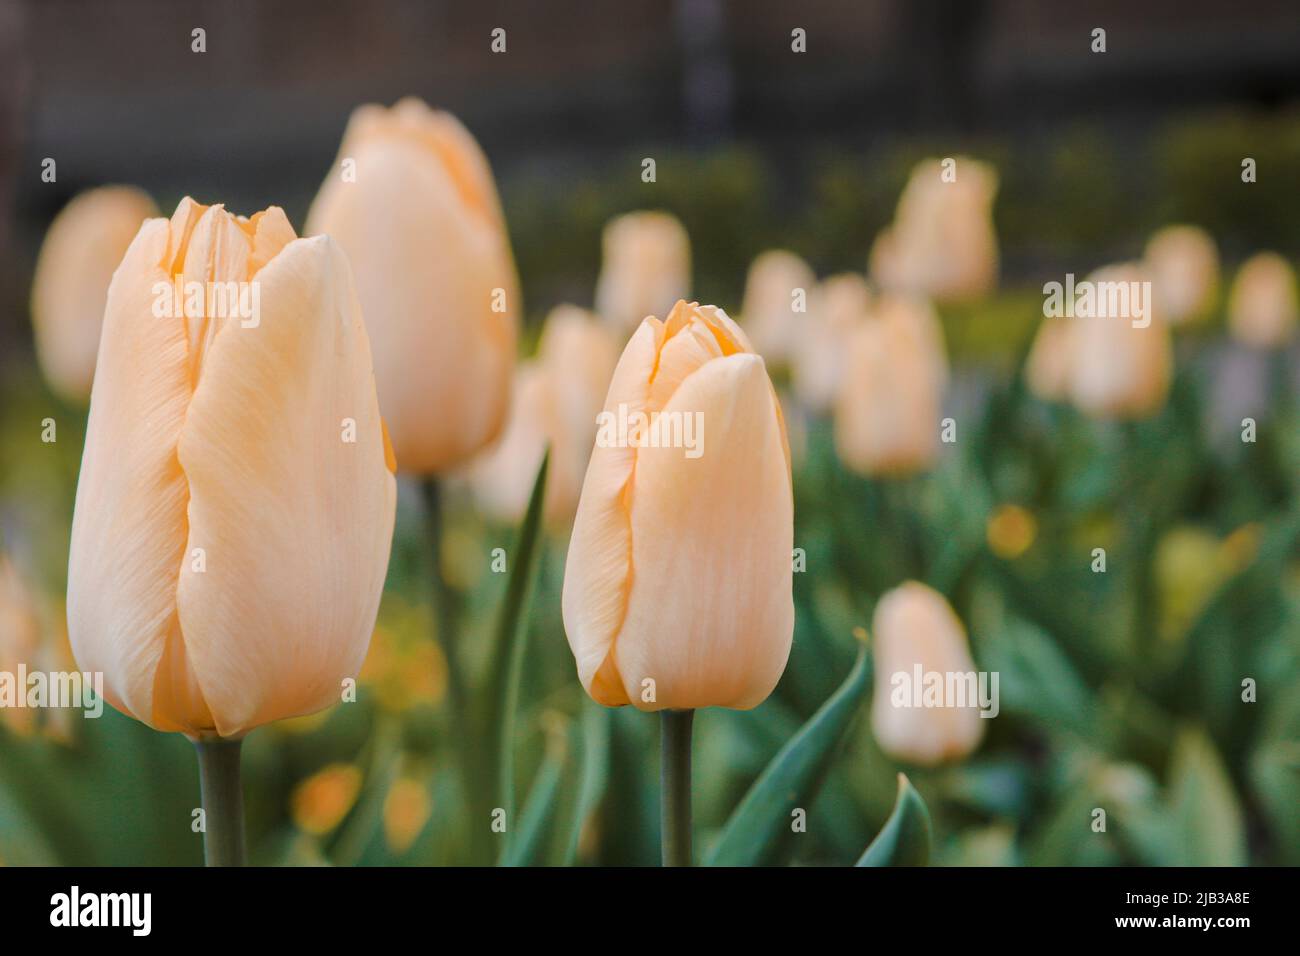 Selective focus - buds of yellow tulips close up. Stock Photo